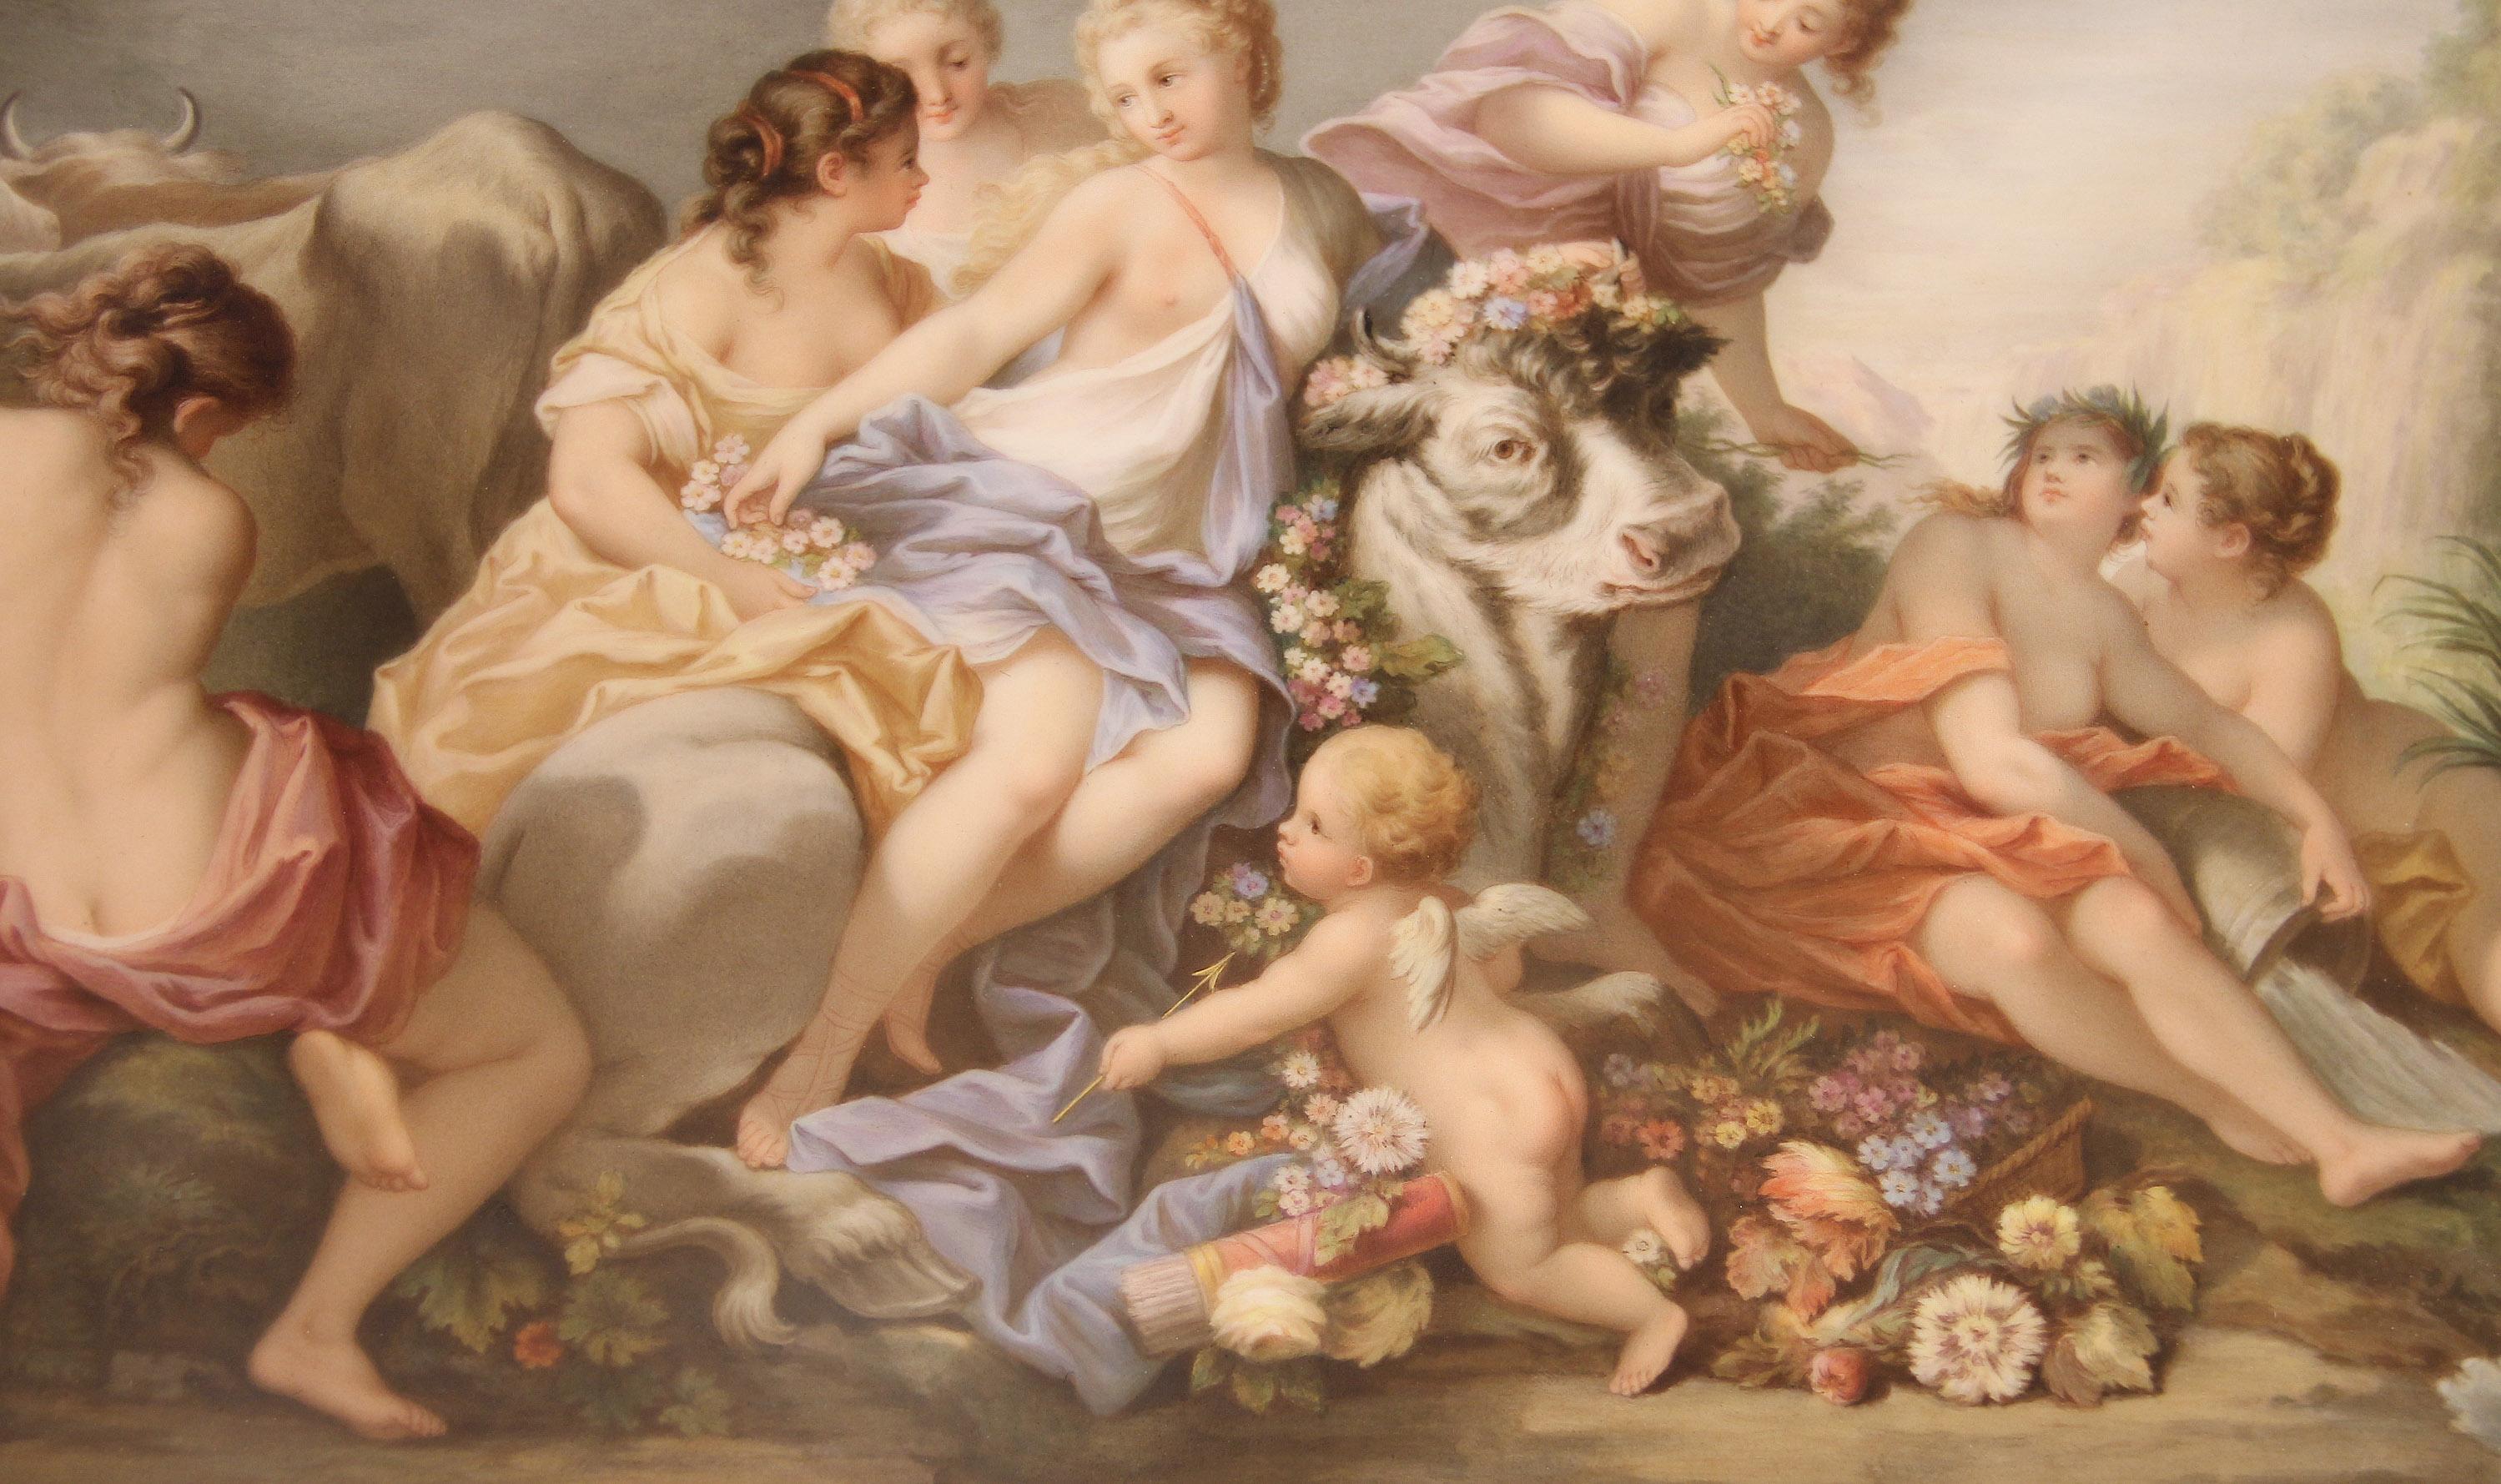 Late 19th century large Meissen Porcelain Plaque Entitled “Rape of Europa” after François Boucher

Ovid’s ‘Metamorphoses’ (II, 835–875) tells of the abduction of Europa by Jupiter, disguised as a bull. Charmed by the bull’s good nature, Europa